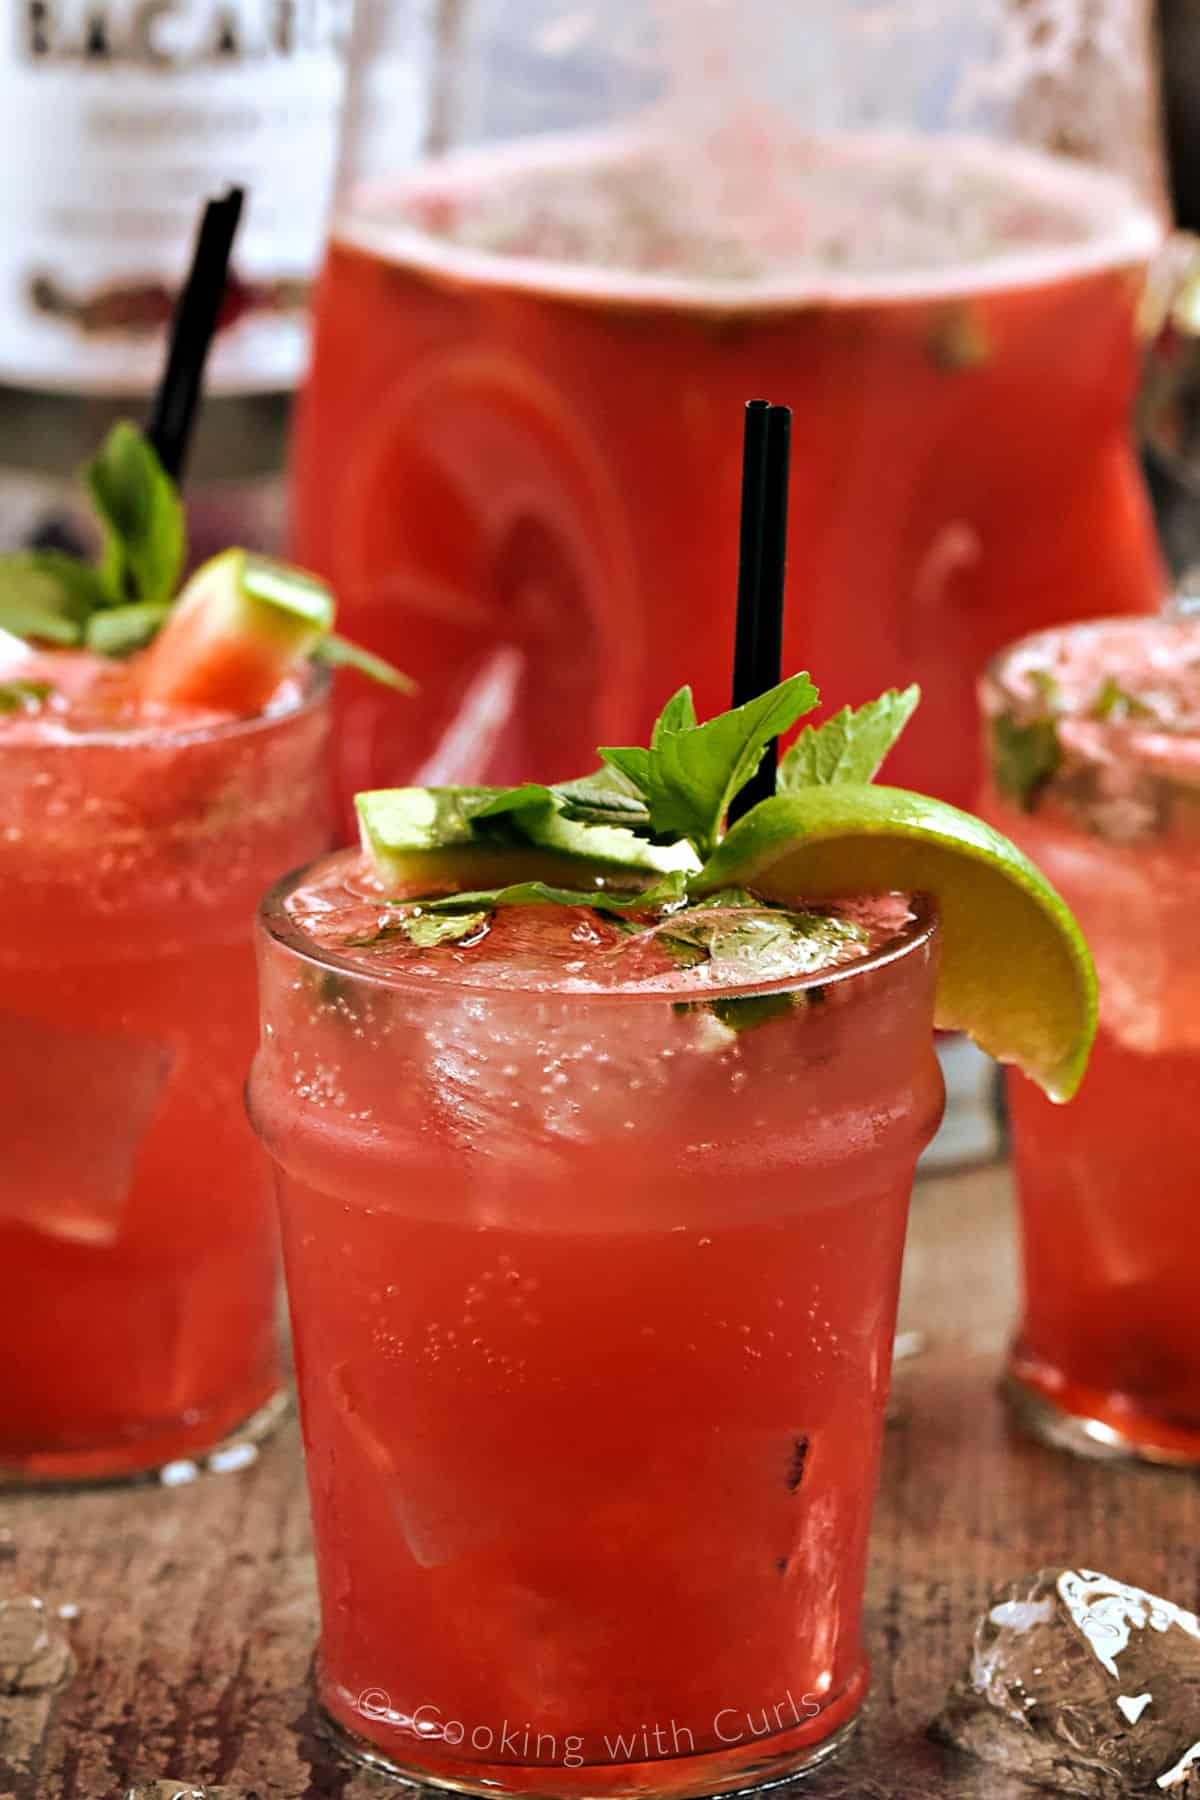 Three glasses and a pitcher filled with a bright pink cocktail garnished with watermelon and lime wedges with fresh mint sprigs.